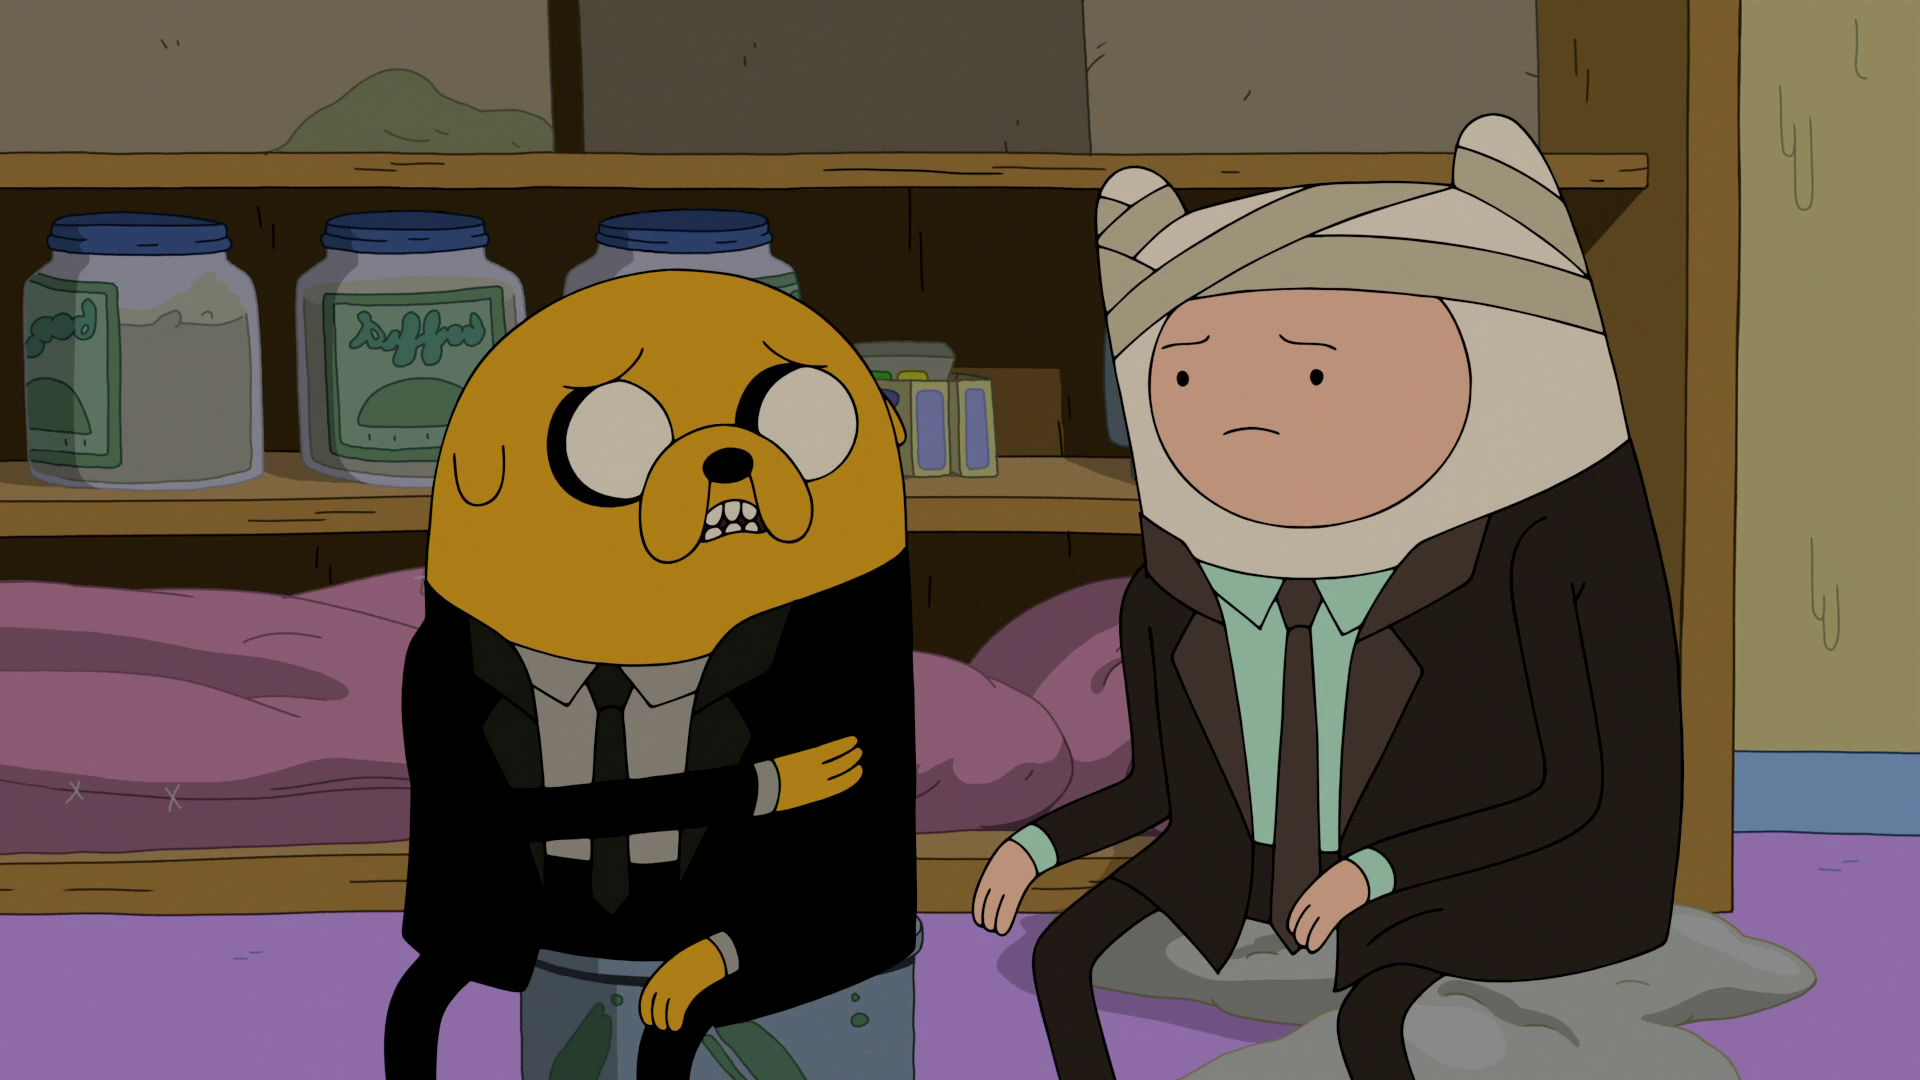 Image S5e42 Finn With Jake In The Storage Png Adventure Time Wiki